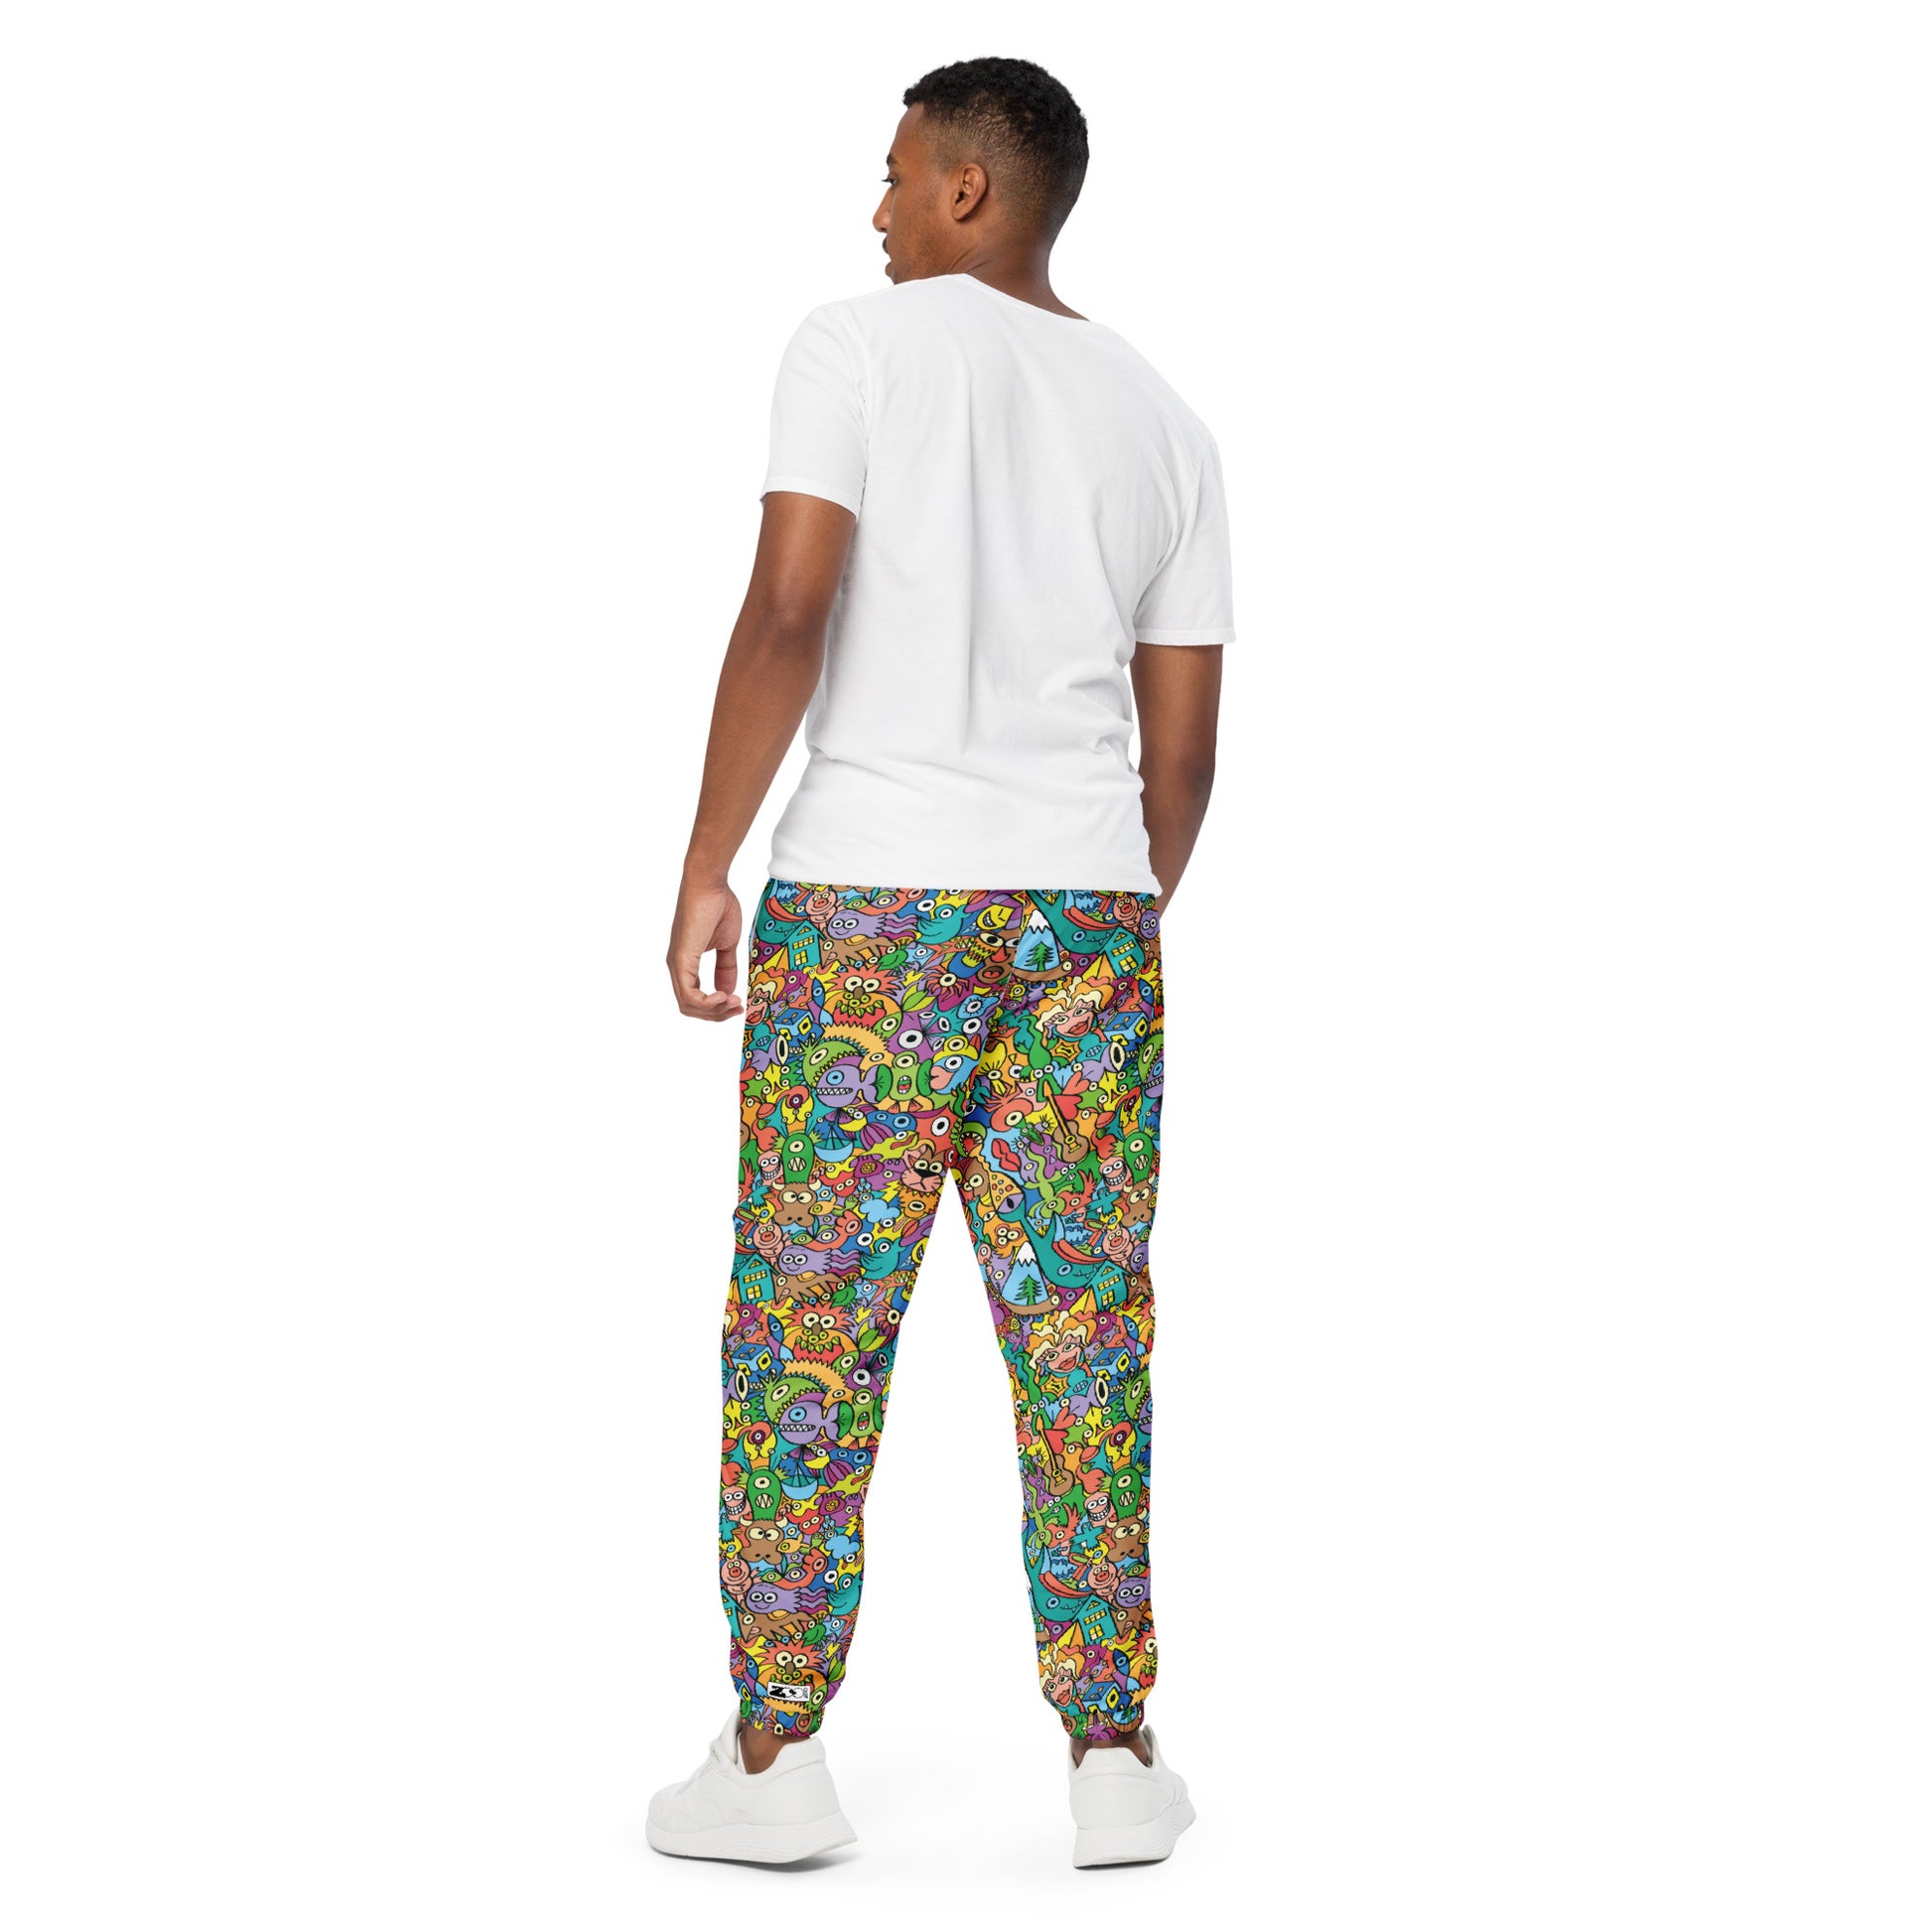 Cheerful crowd enjoying a lively carnival Unisex track pants. Back view